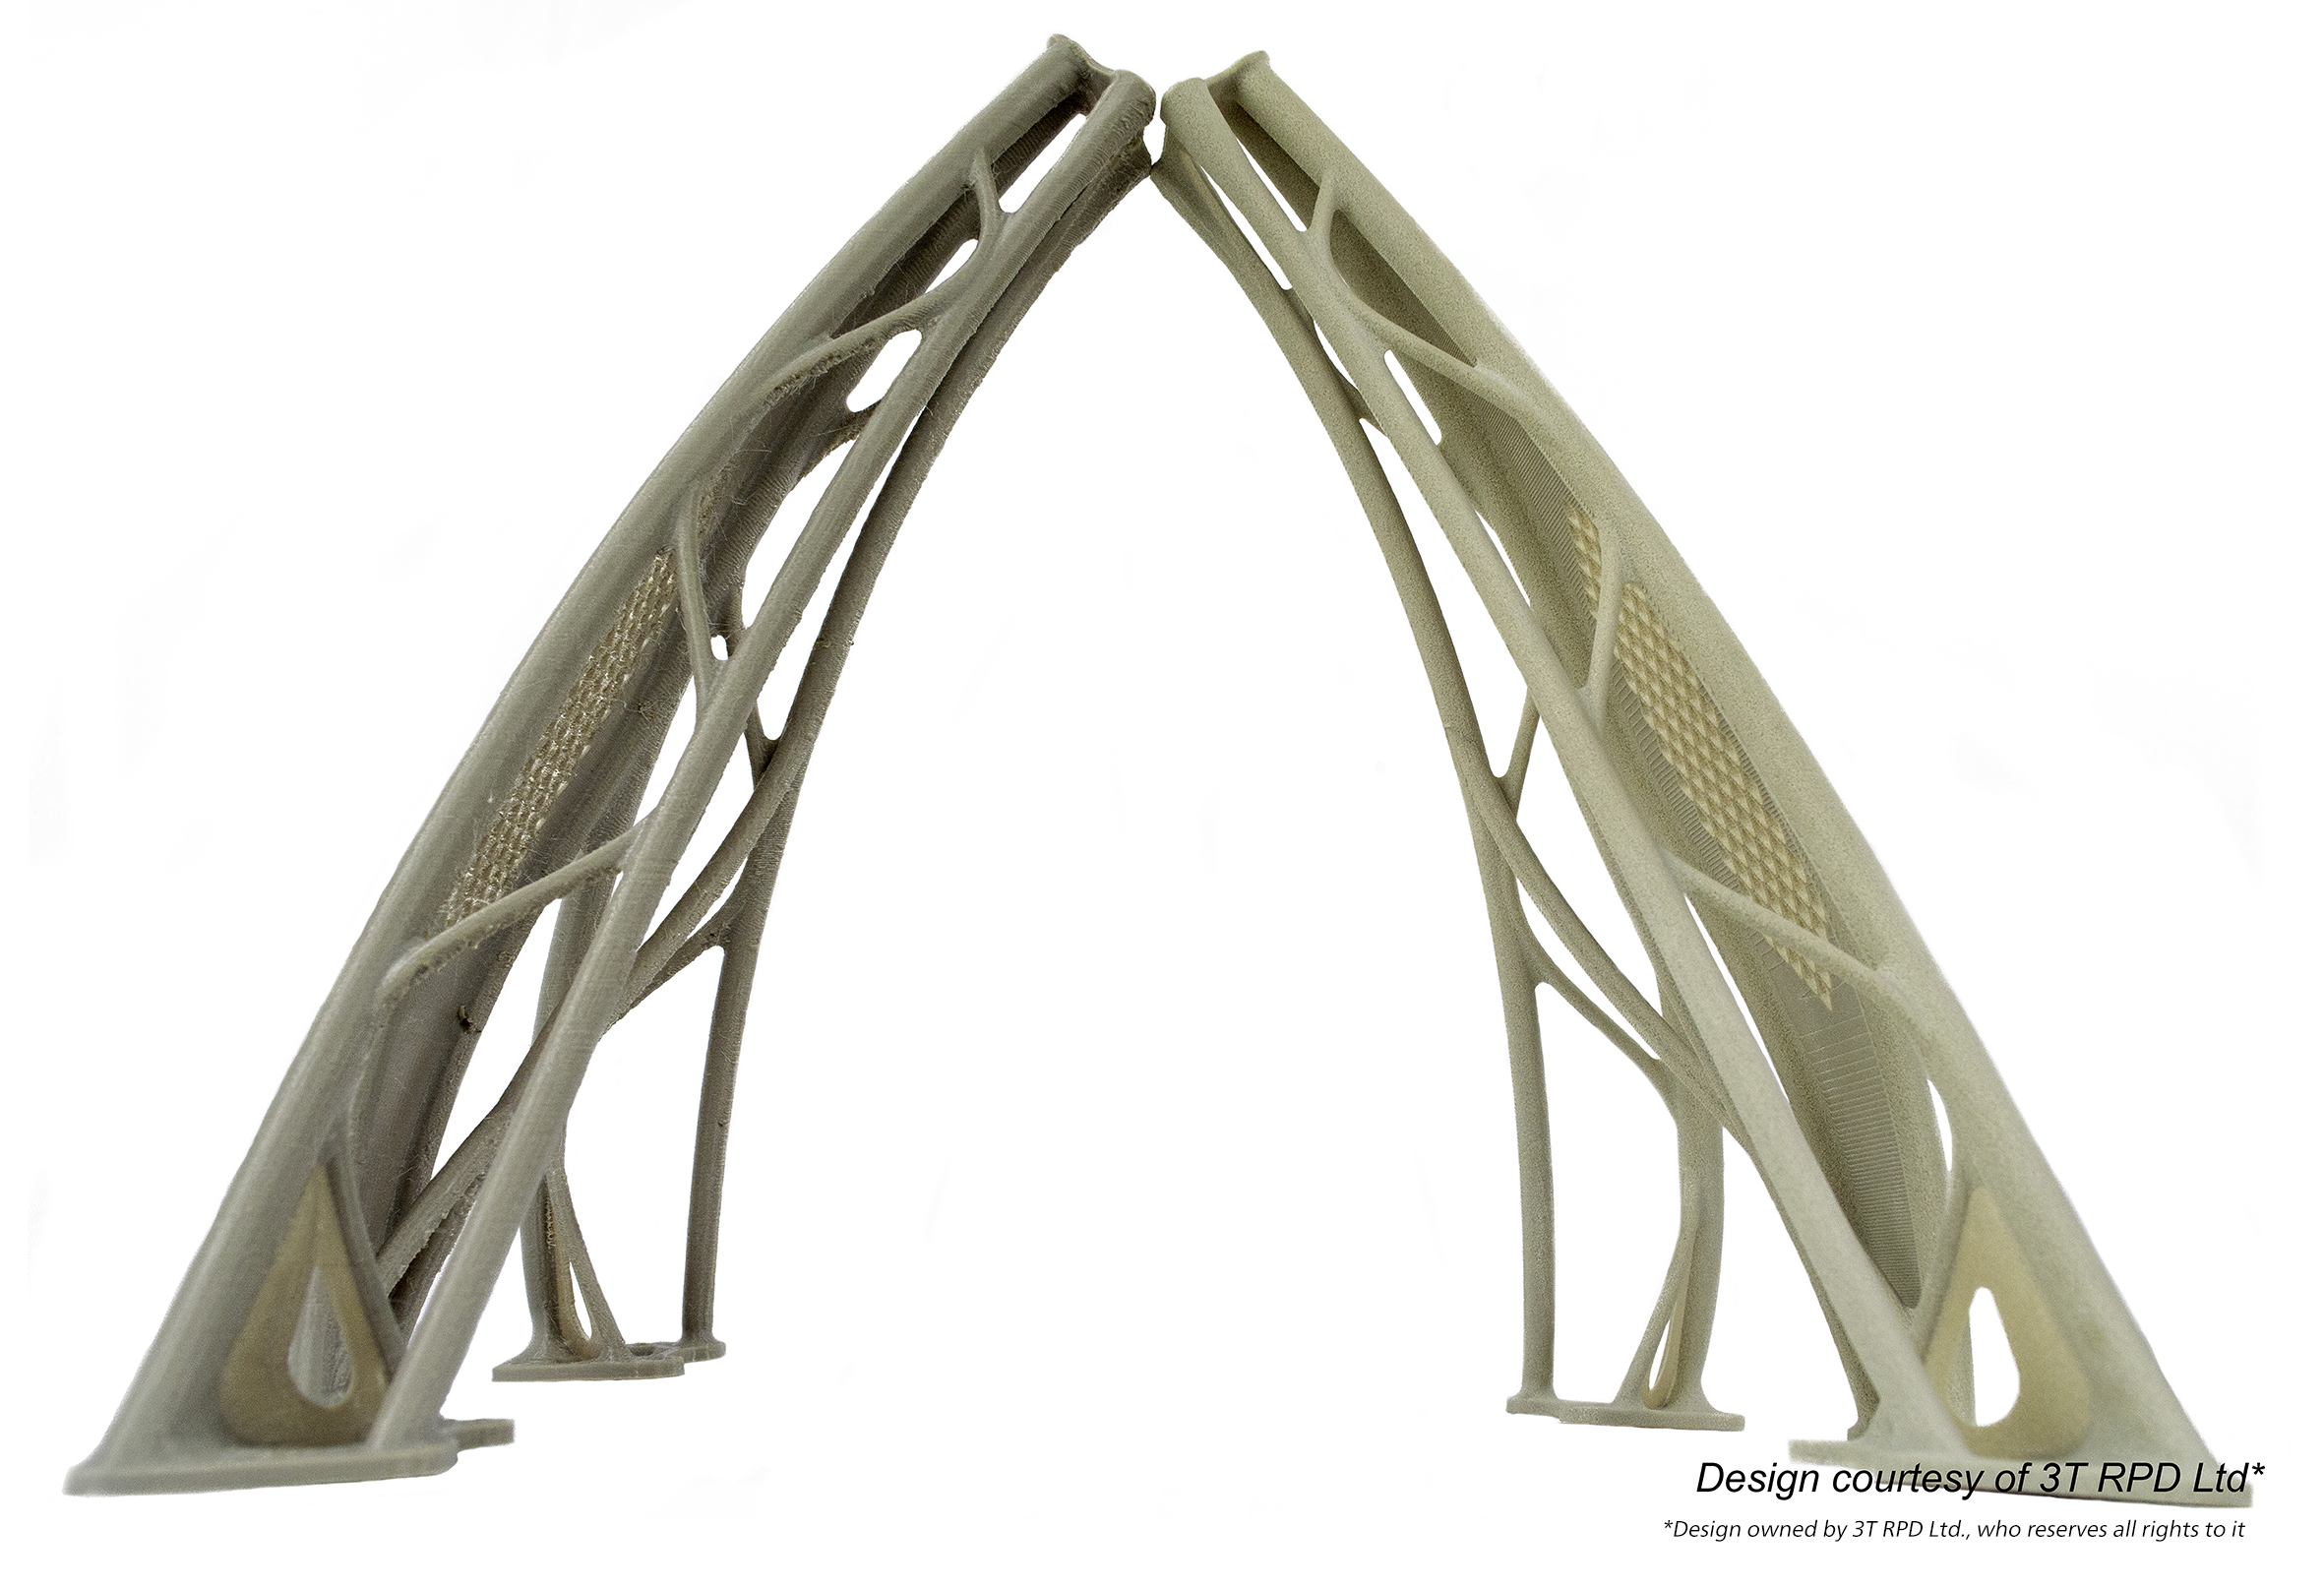 Victrex has developed new materials to make a 3D printed bio-mimetic bracket.